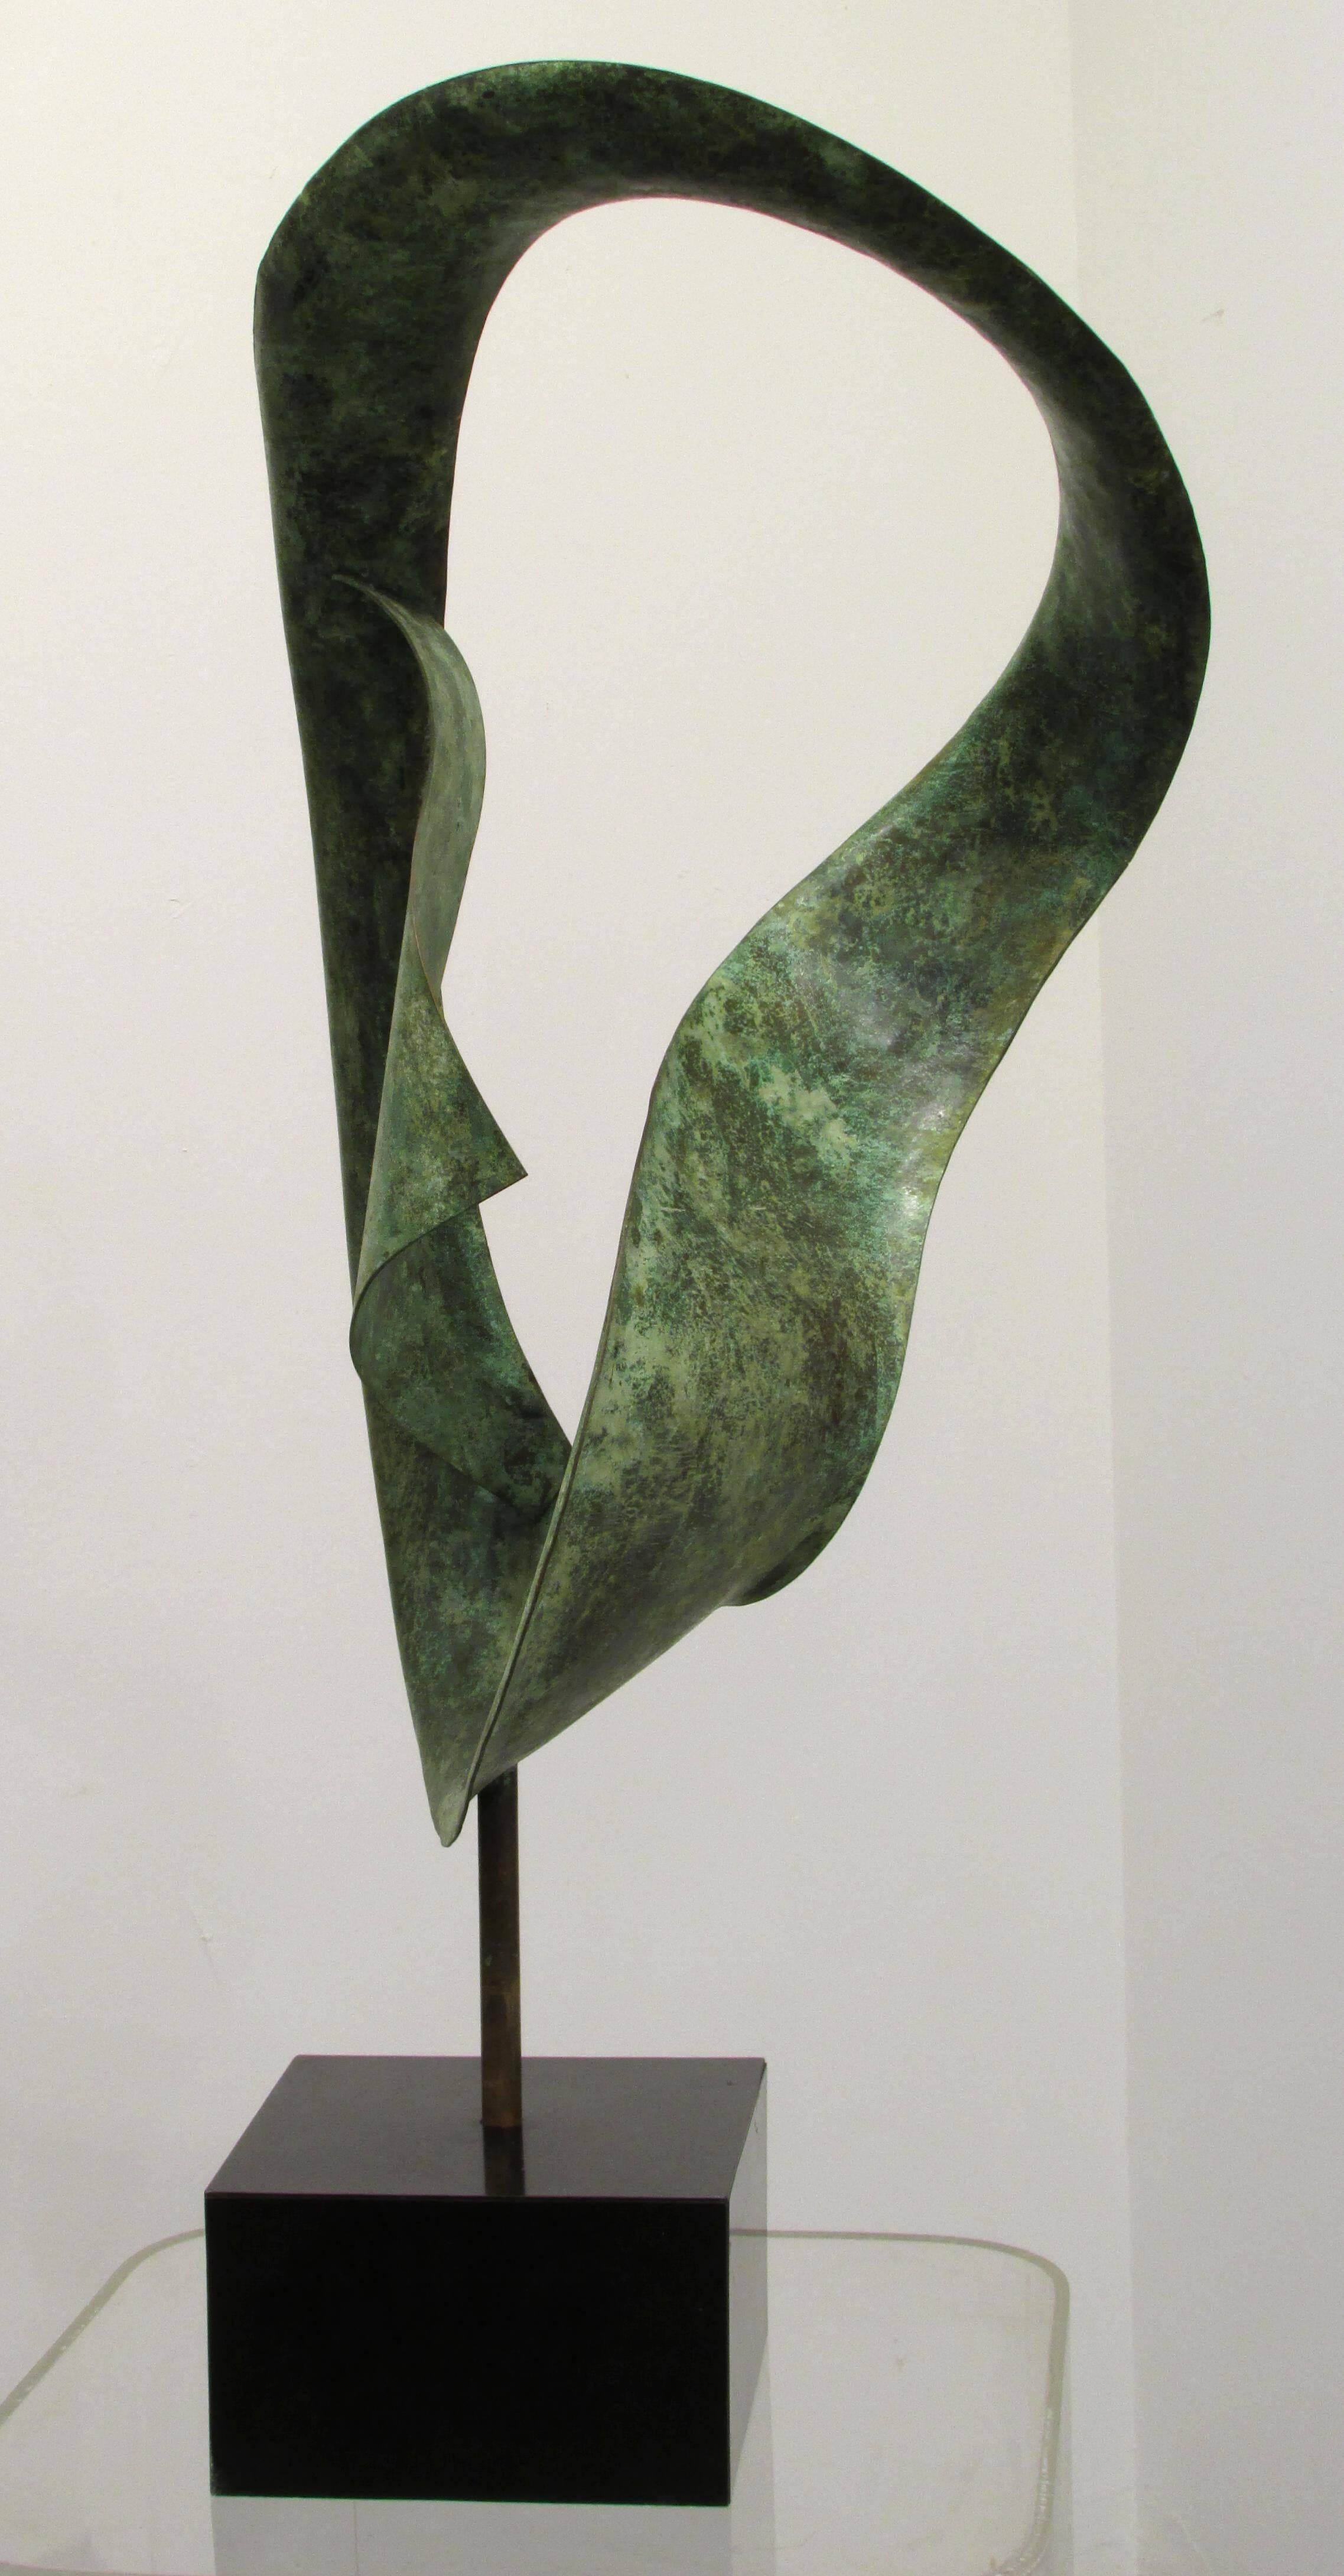 Hand-hammered abstract copper sculpture with patina on a black base sculpture is inserted into base and can turn.